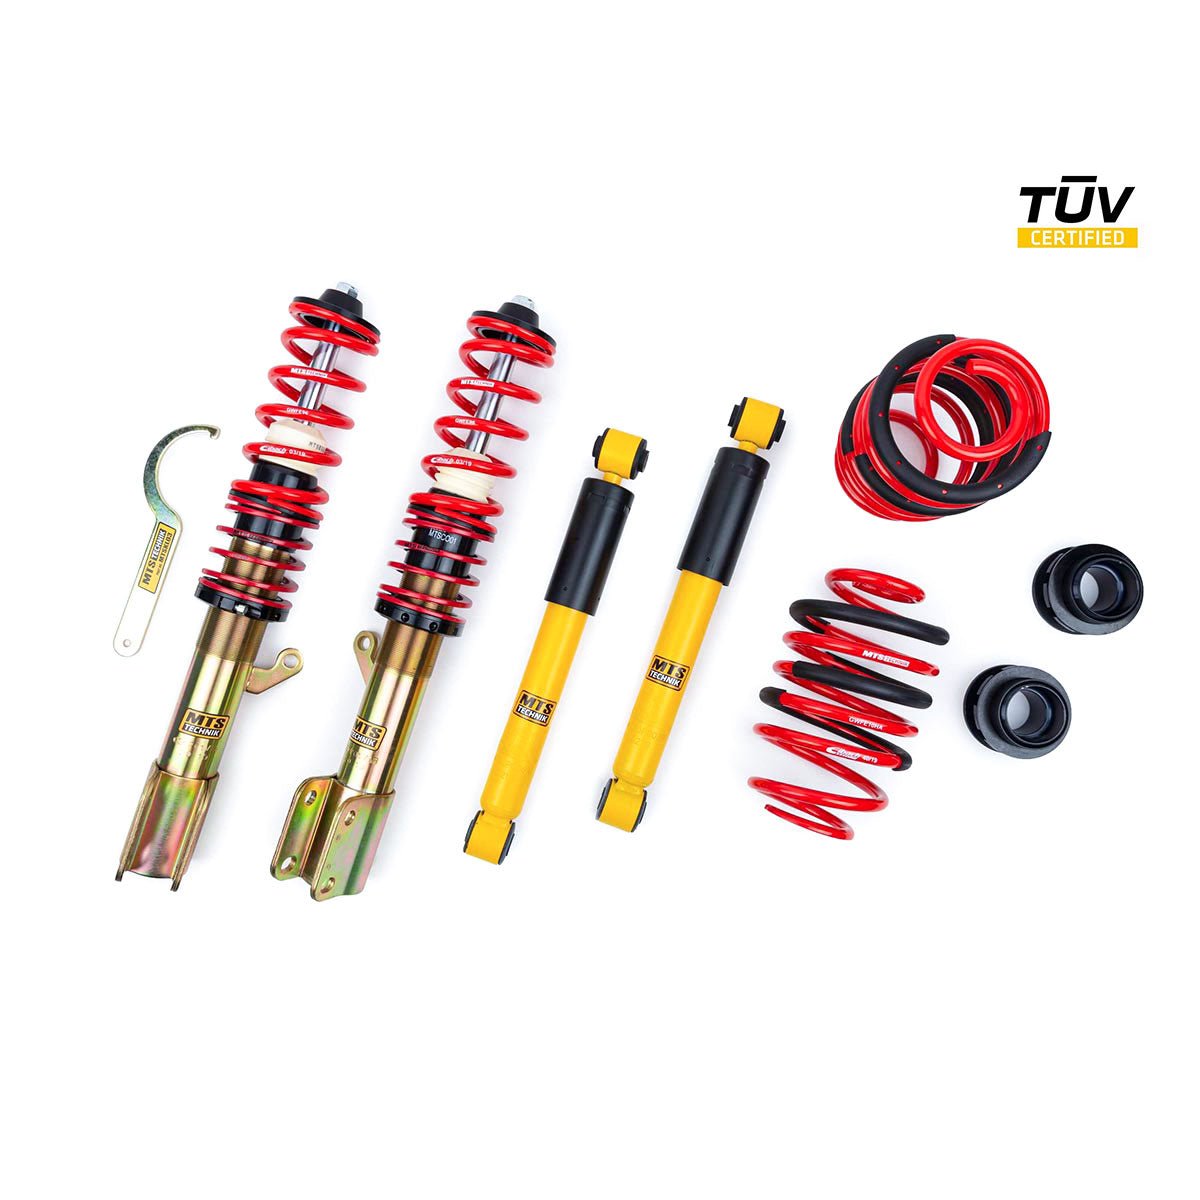 MTS TECHNIK coilover kit STREET Opel Astra G Hatchback (with TÜV) - PARTS33 GmbH